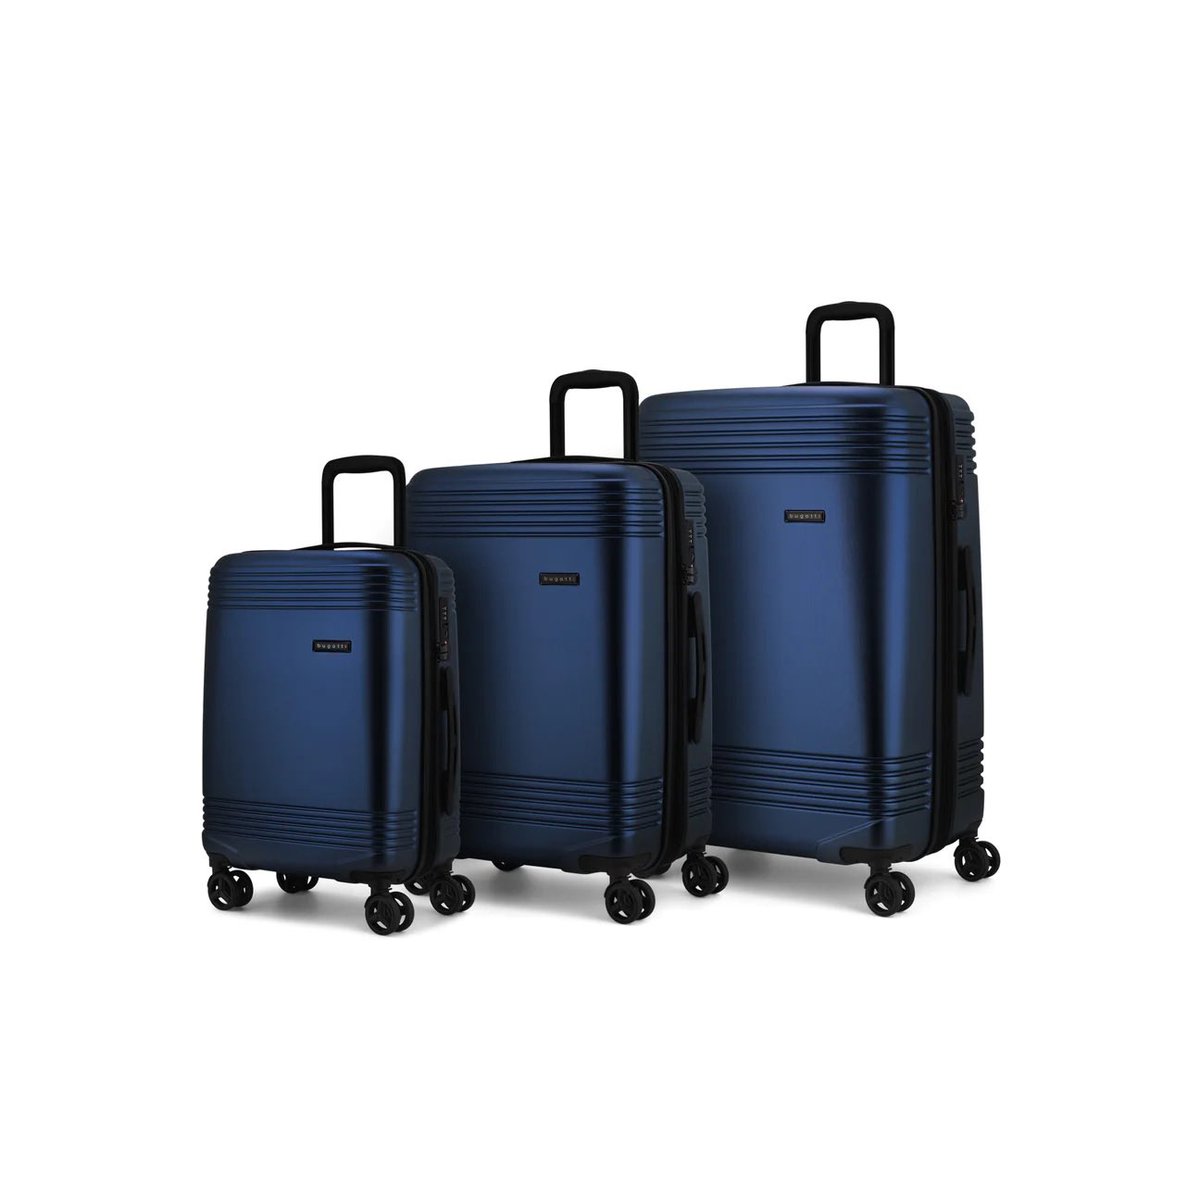 Did you know that you can get a free 3 piece packing cube set with the purchase of any @bugattigrp luggage when you shop with us?

Find your bag🧳
Select your desired cube color🔵🟢⚪️
Travel in style✈️

#travel #travellife #travelbags #traveldeals #bagenvy #bugattibags